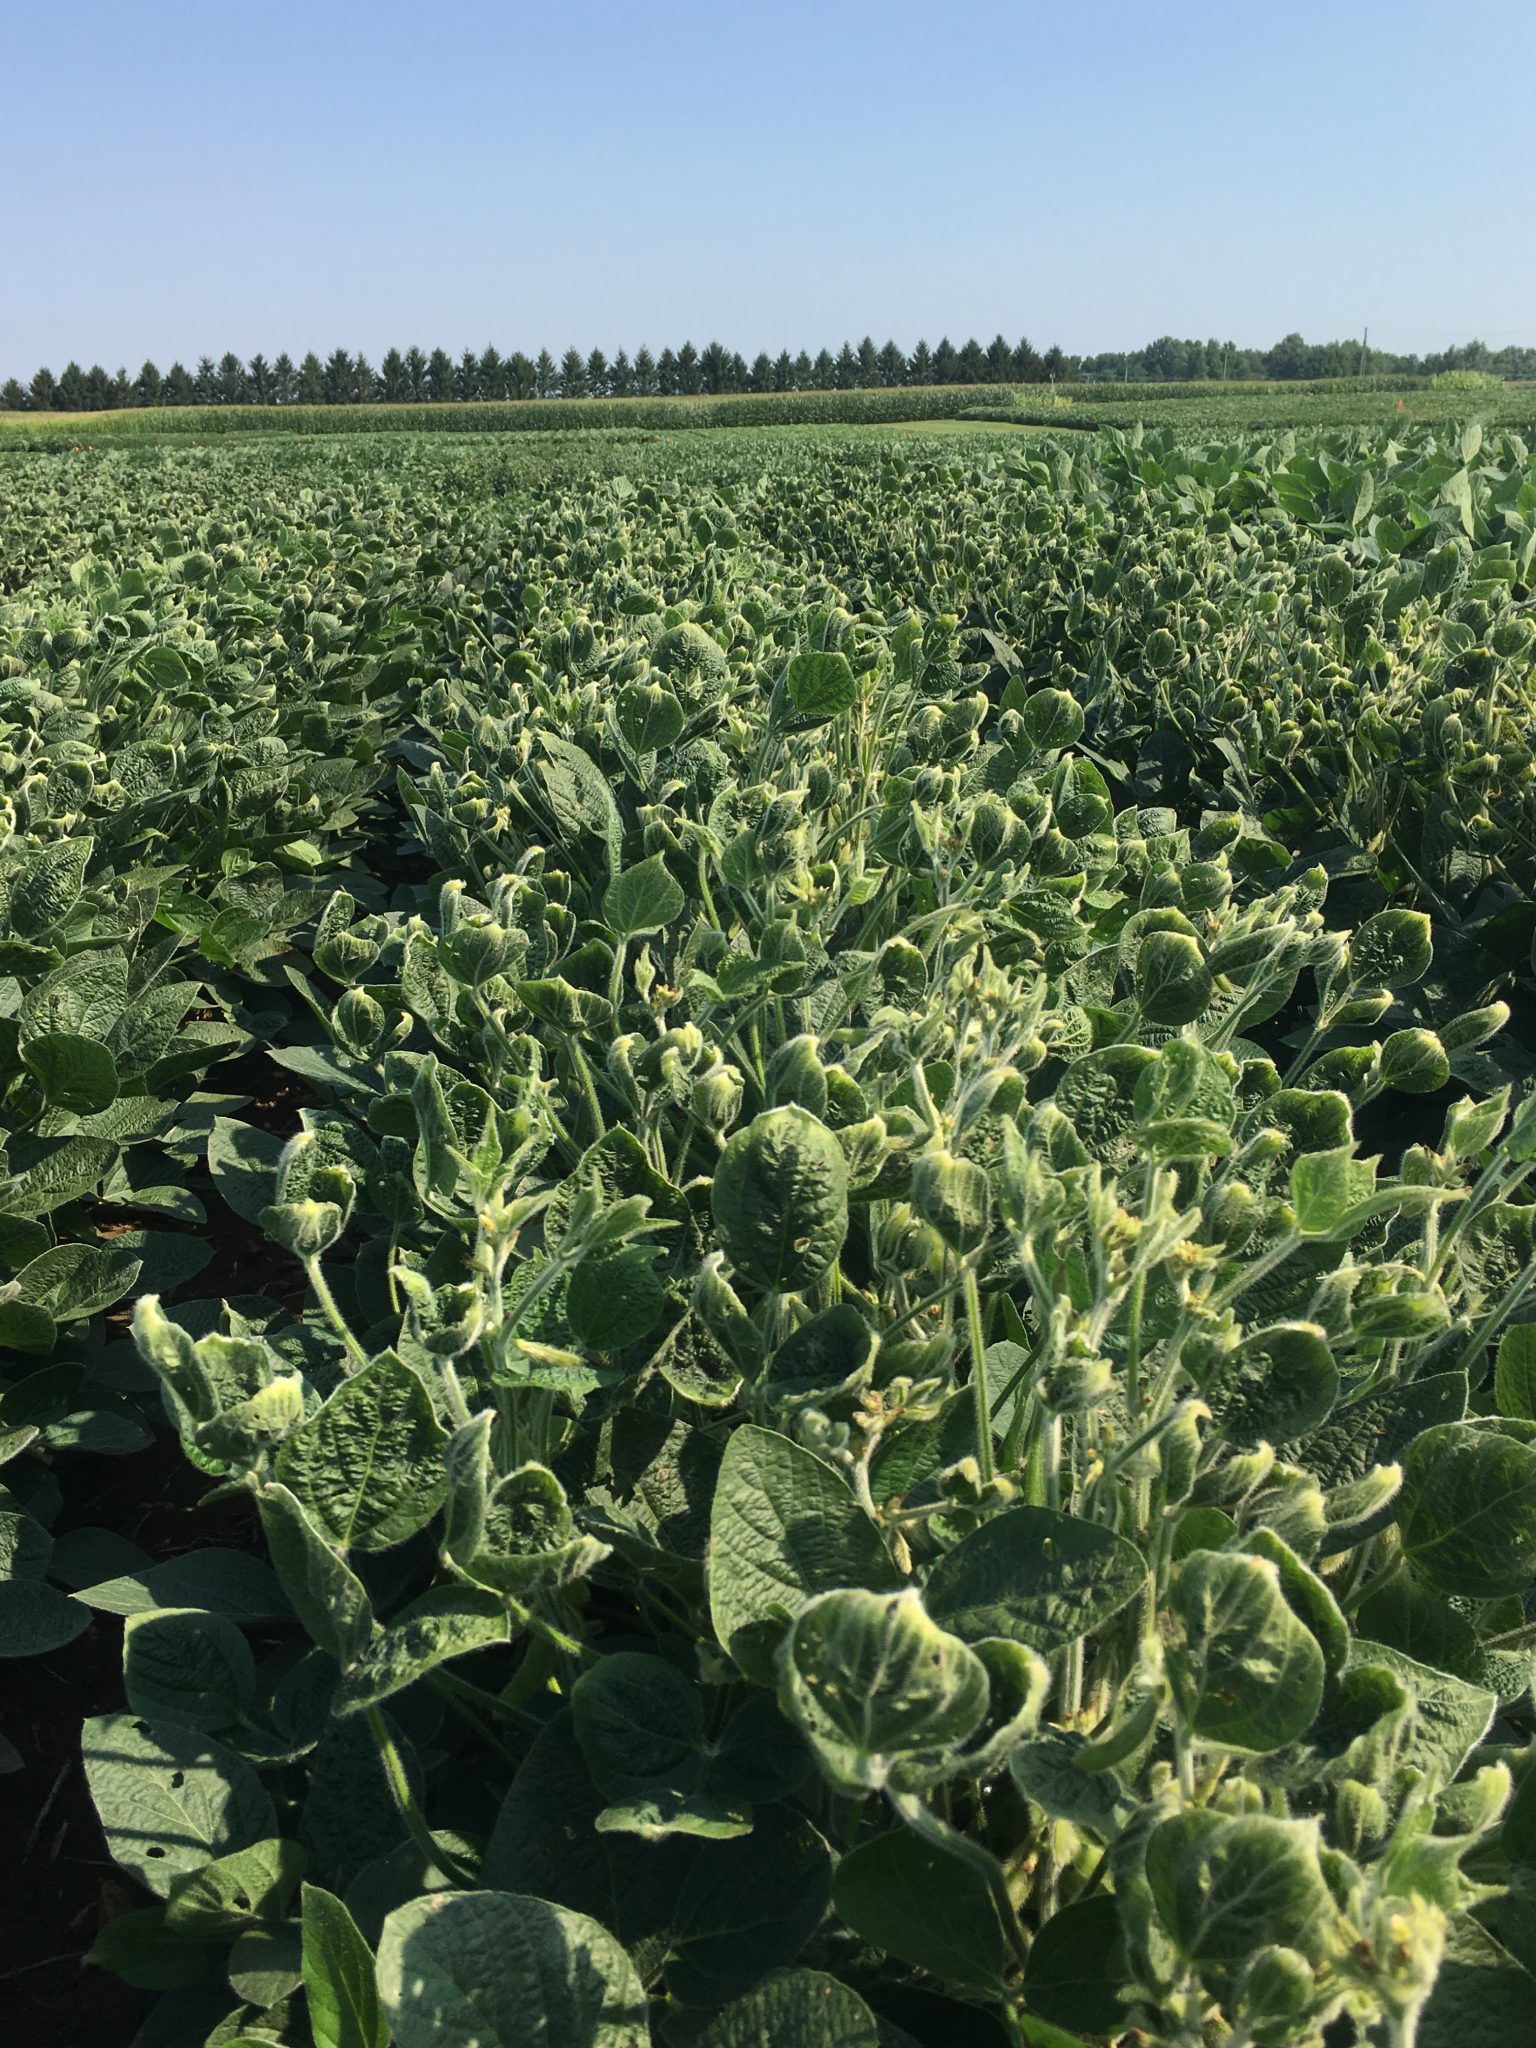 Dicamba injury on susceptible soybeans. (Photo Credit: Cade Hayden)